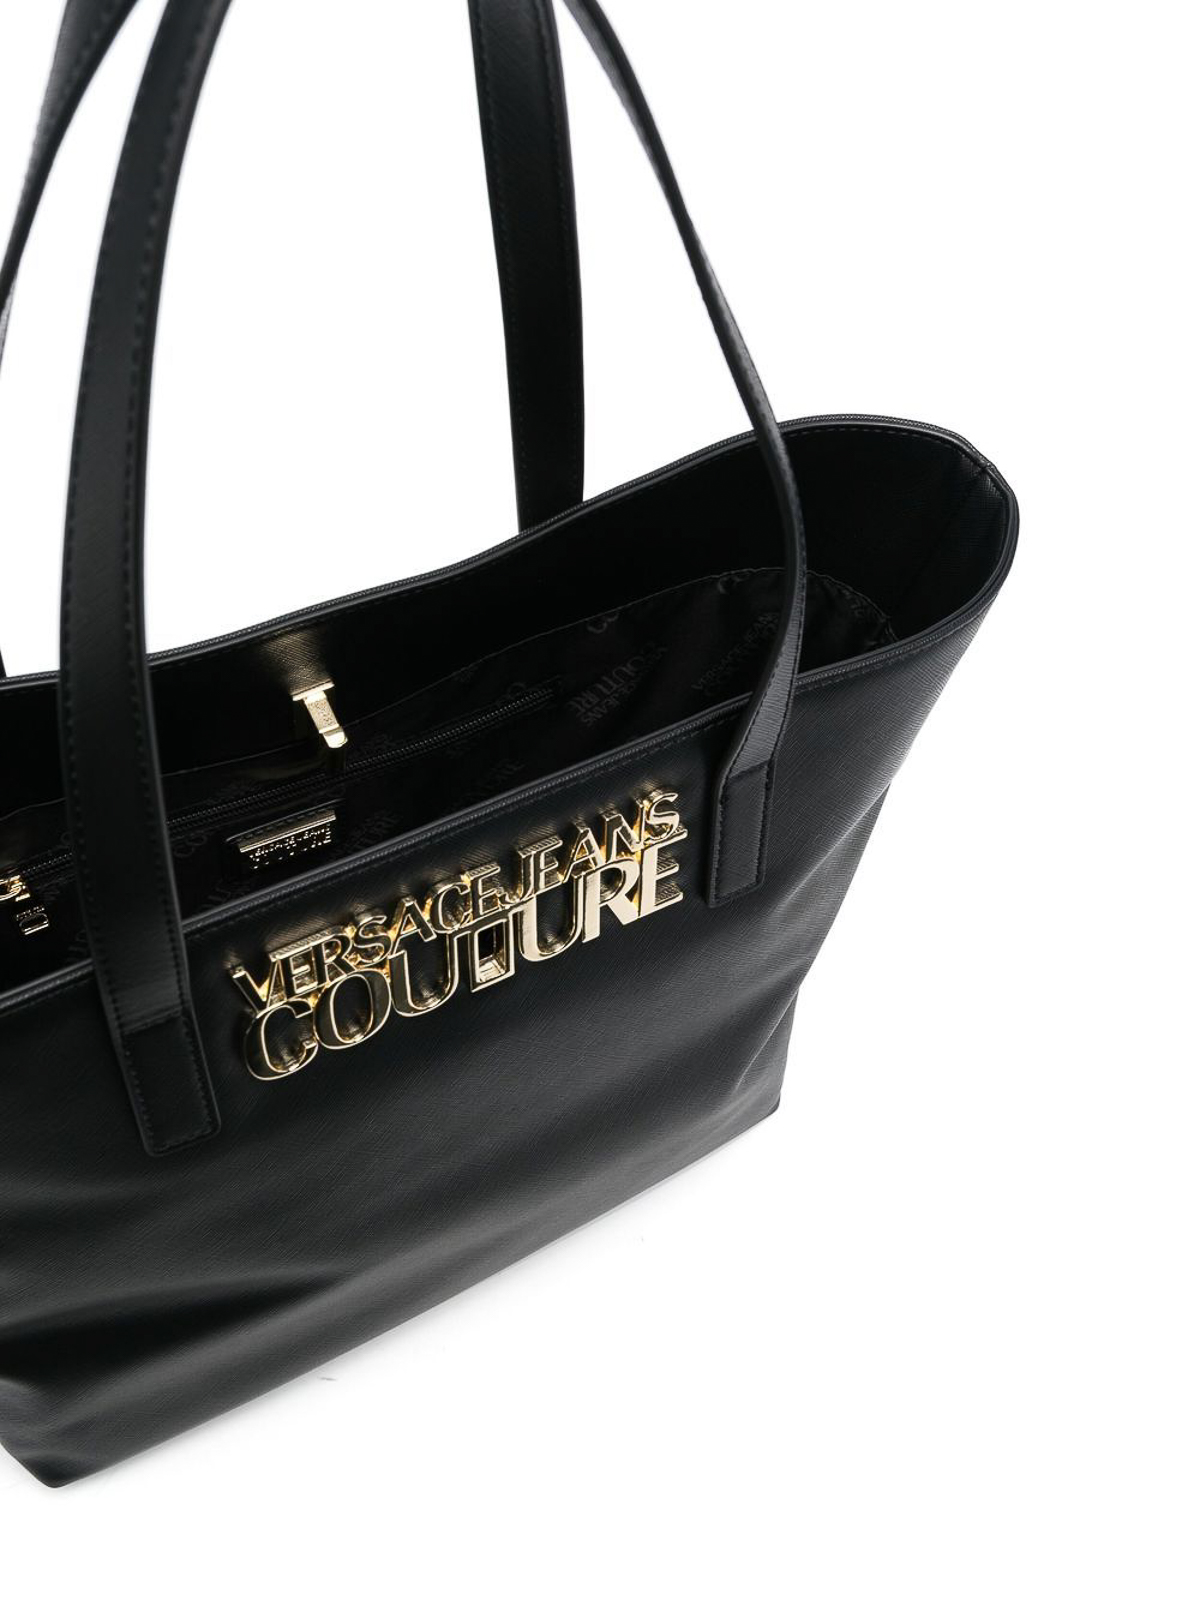 Versace Plaque Leather Tote Bag